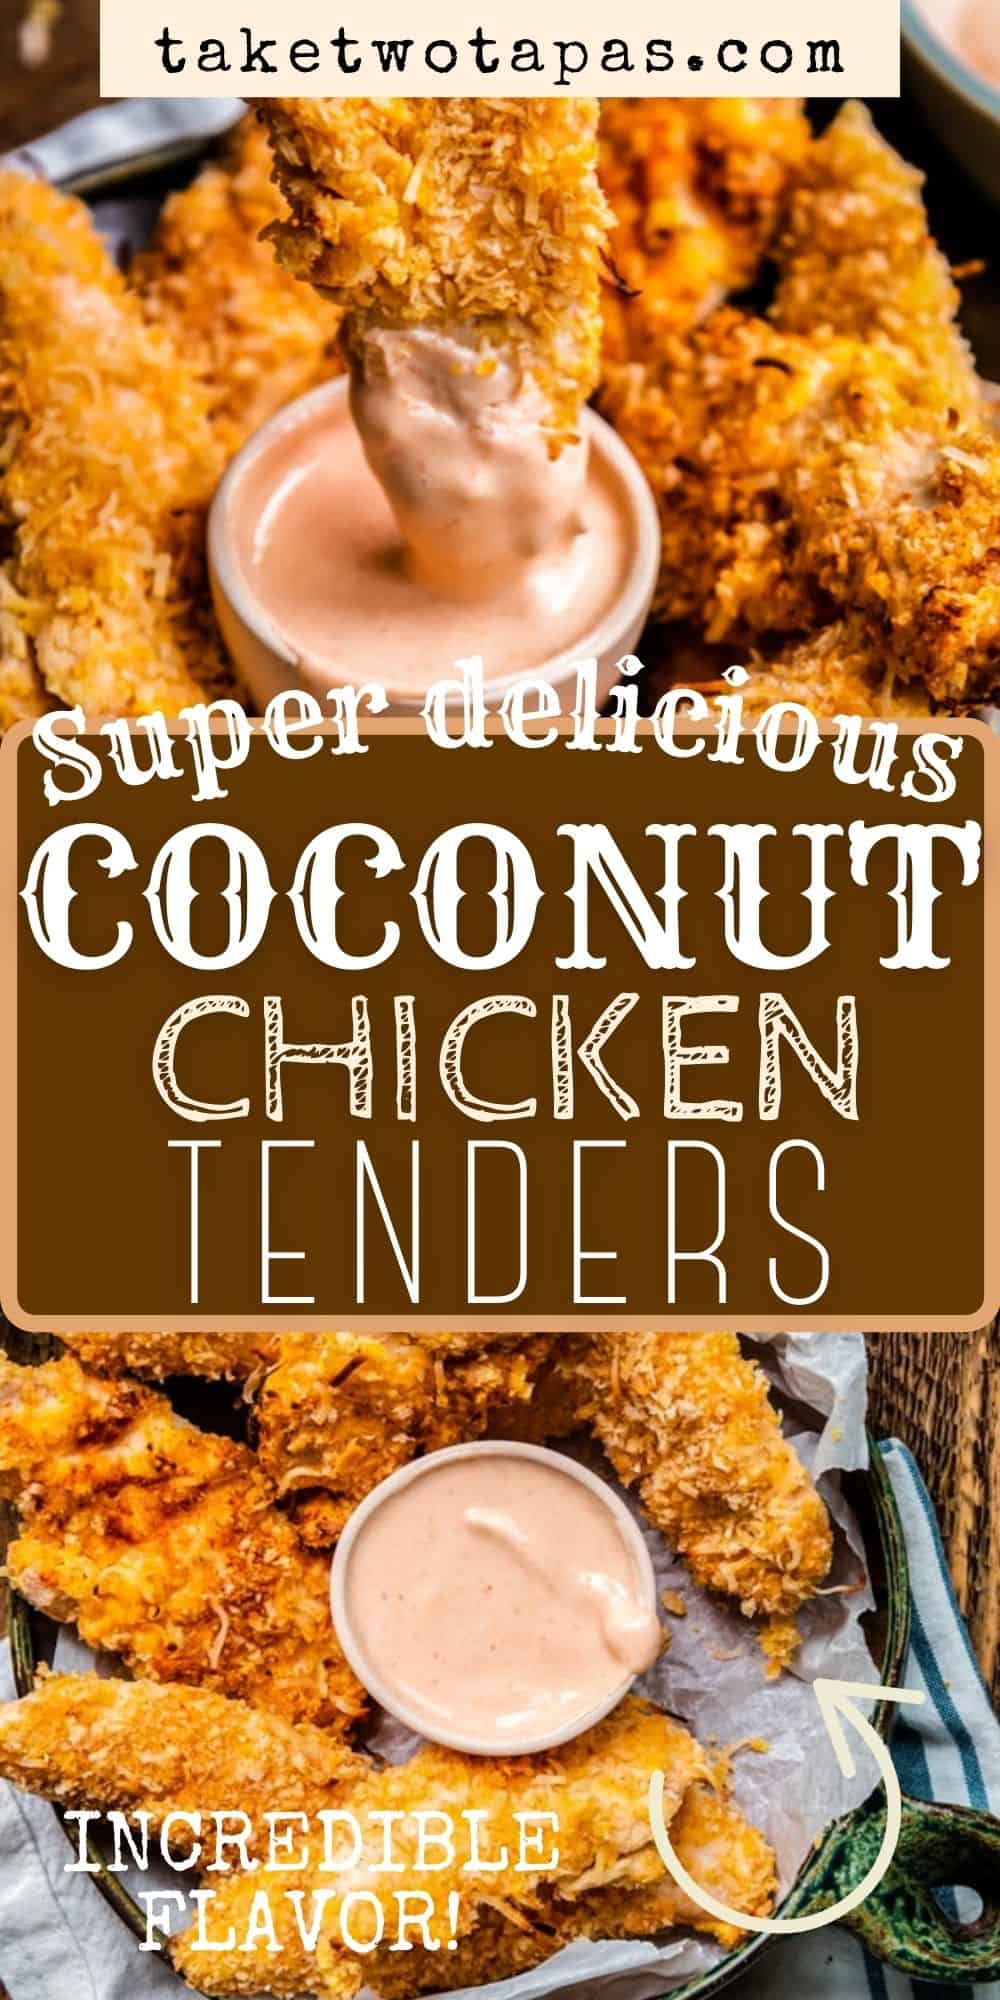 collage of chicken with text "super delicious coconut chicken tenders"